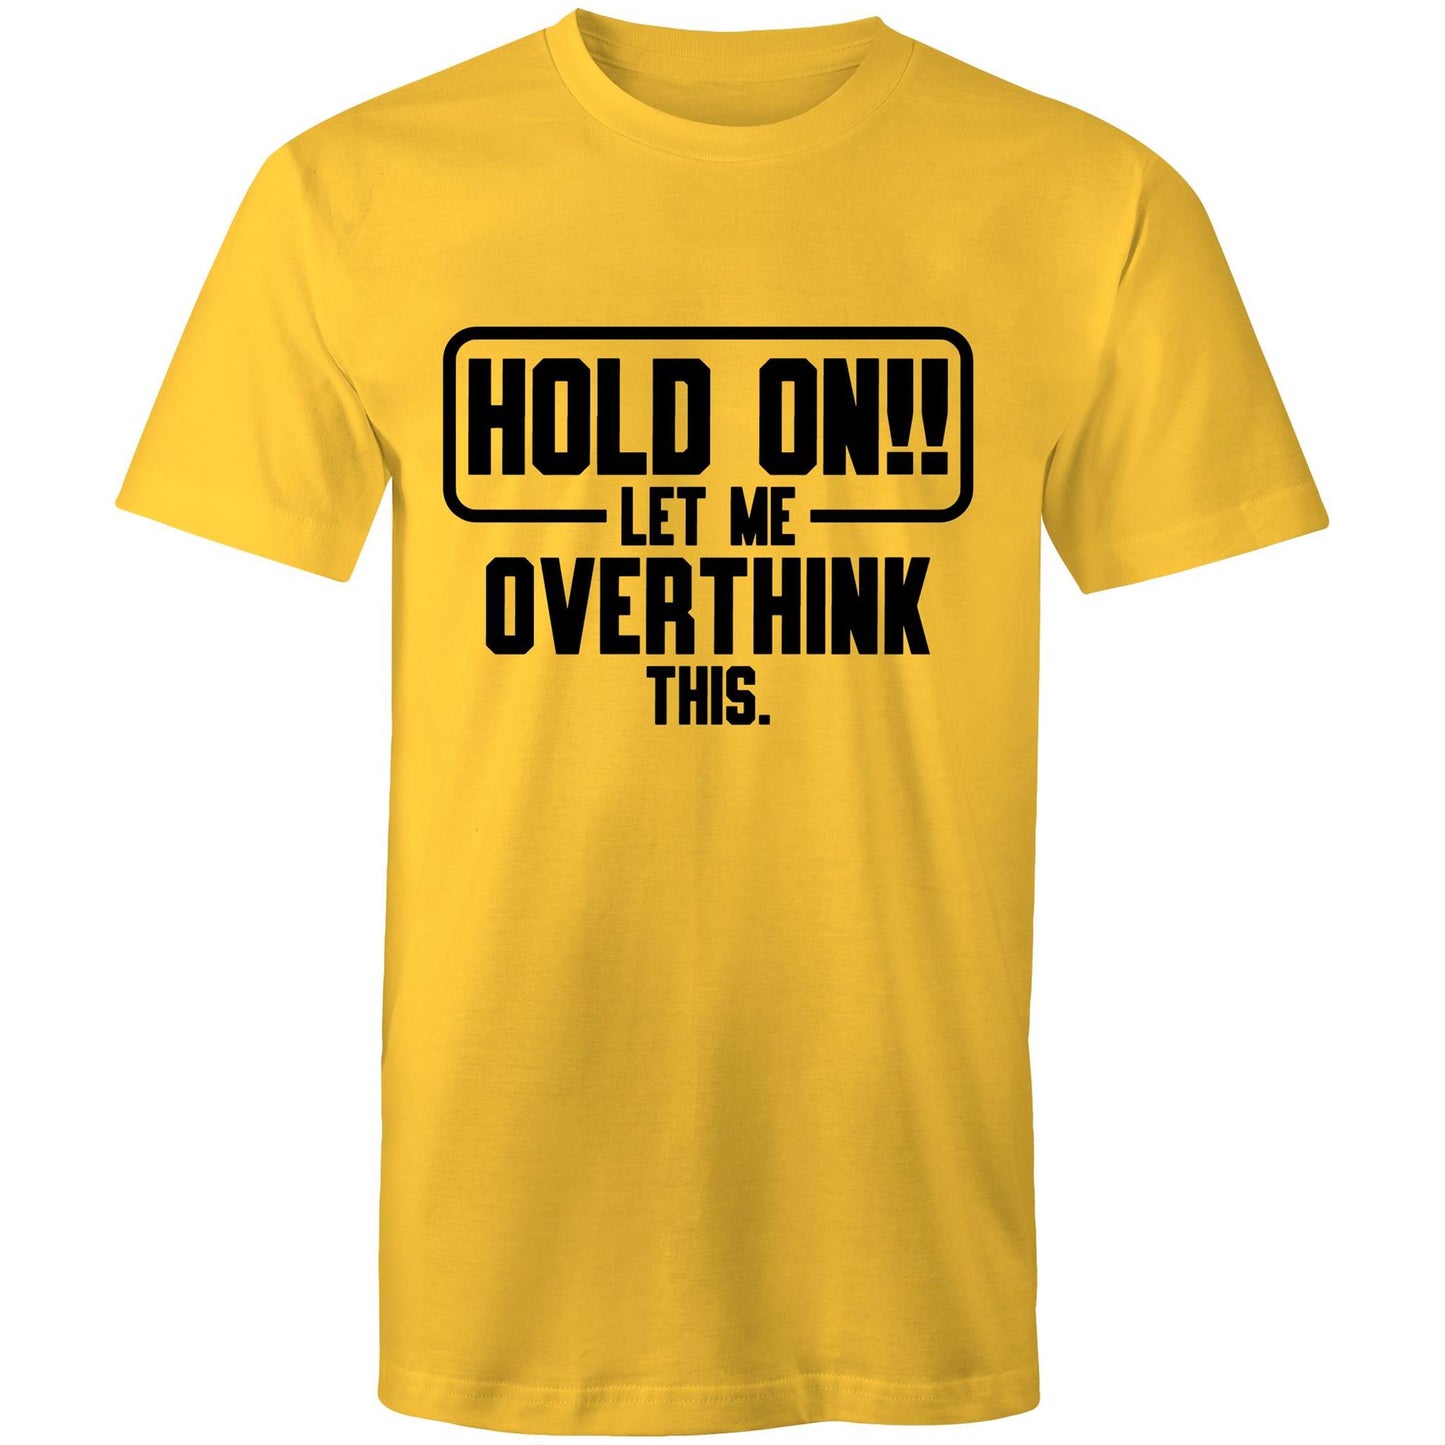 Mens T-Shirt - Hold On Let Me Overthink This